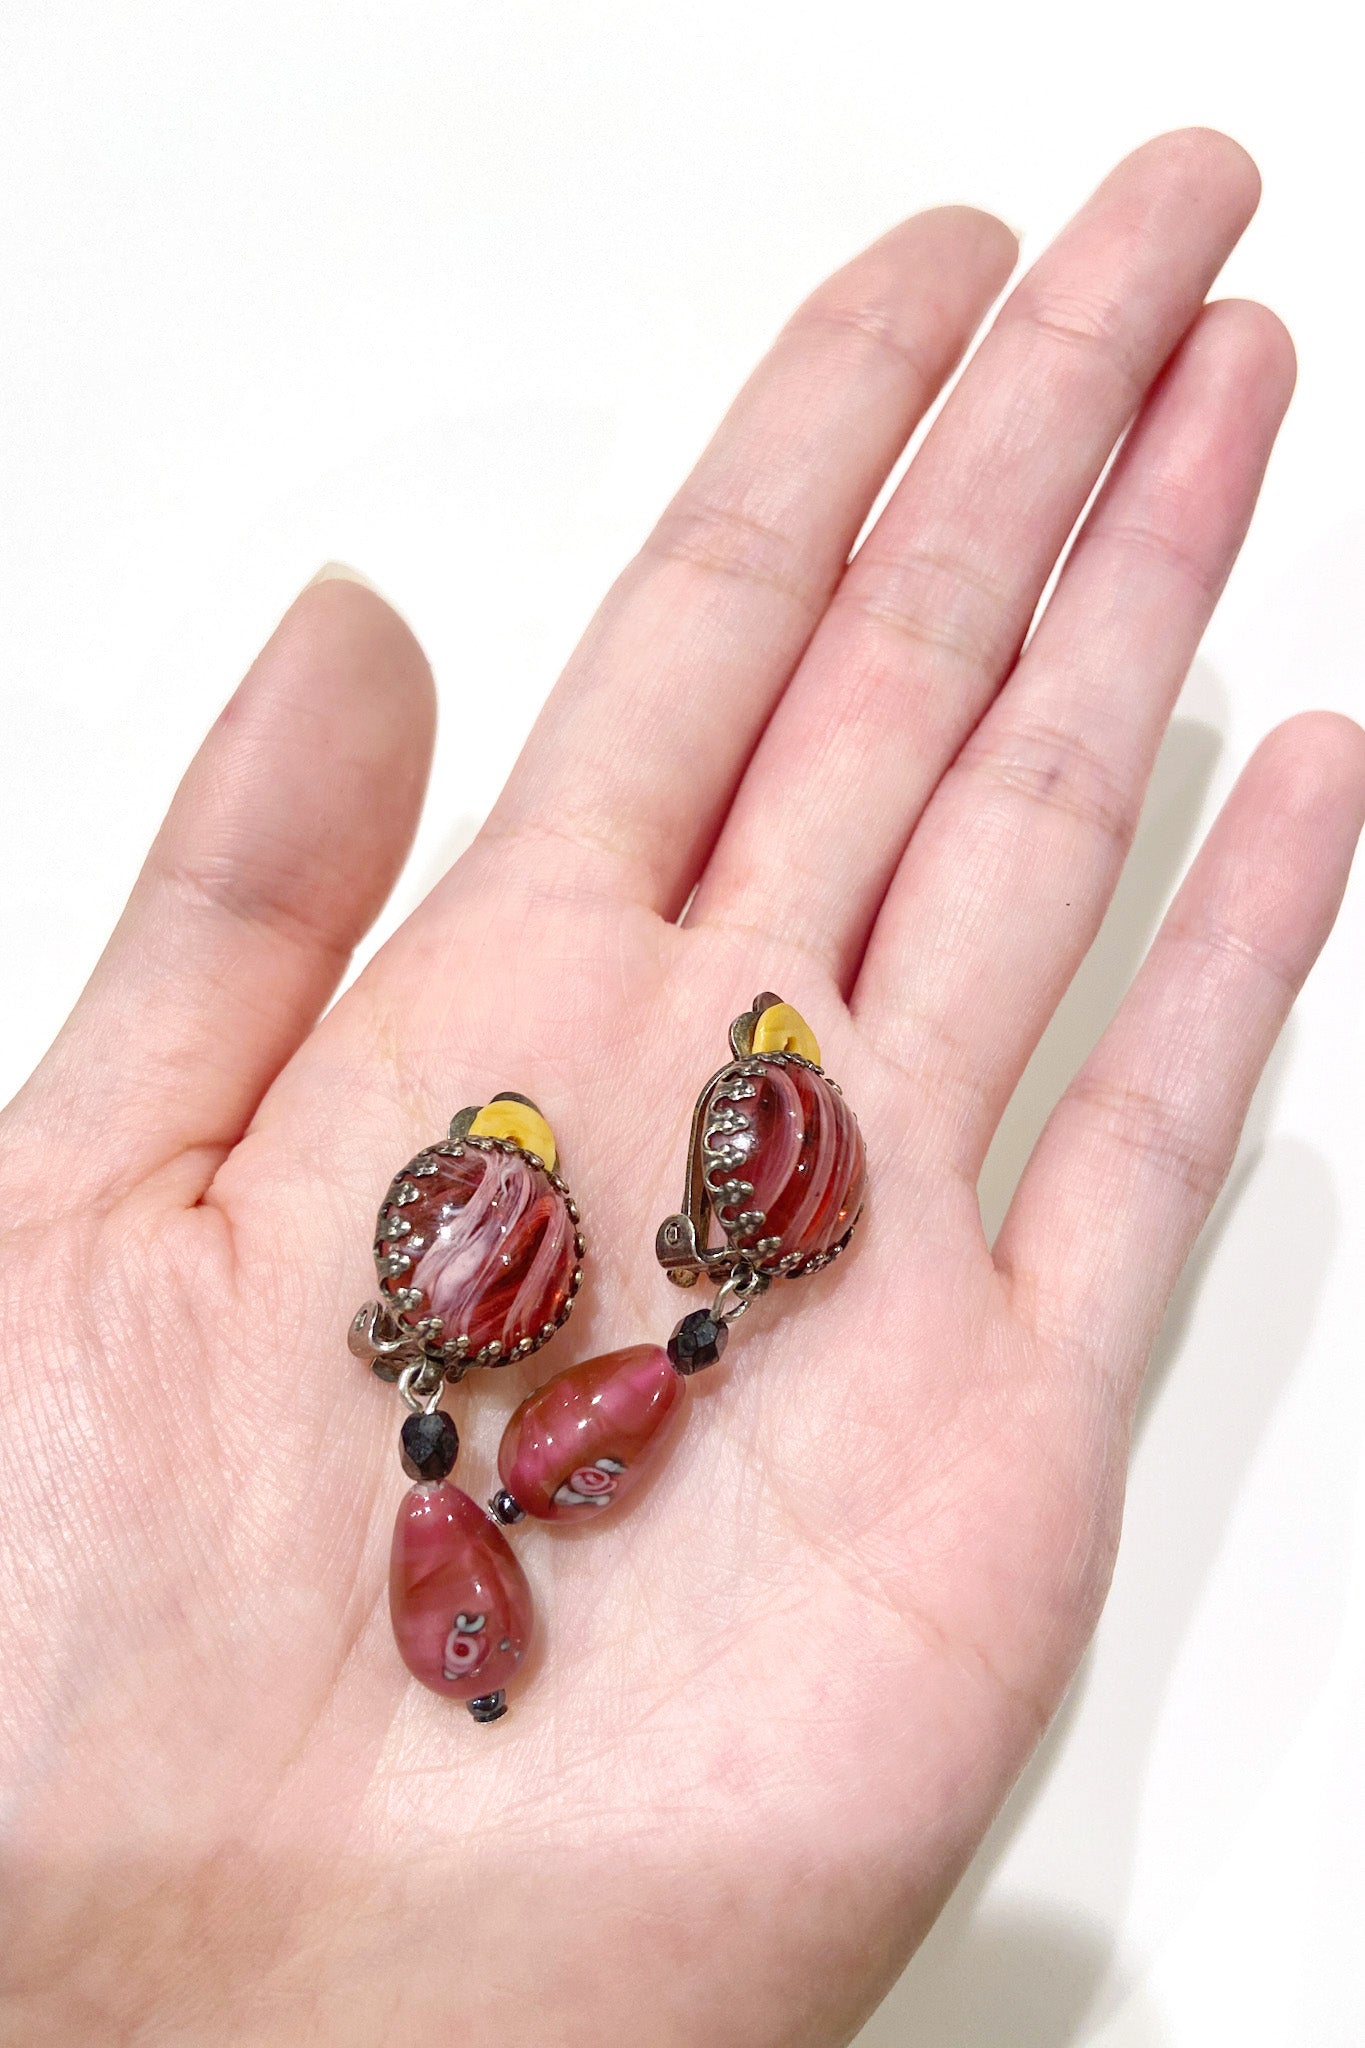 Vintage pink drop earring 優美なラベンダーピンク